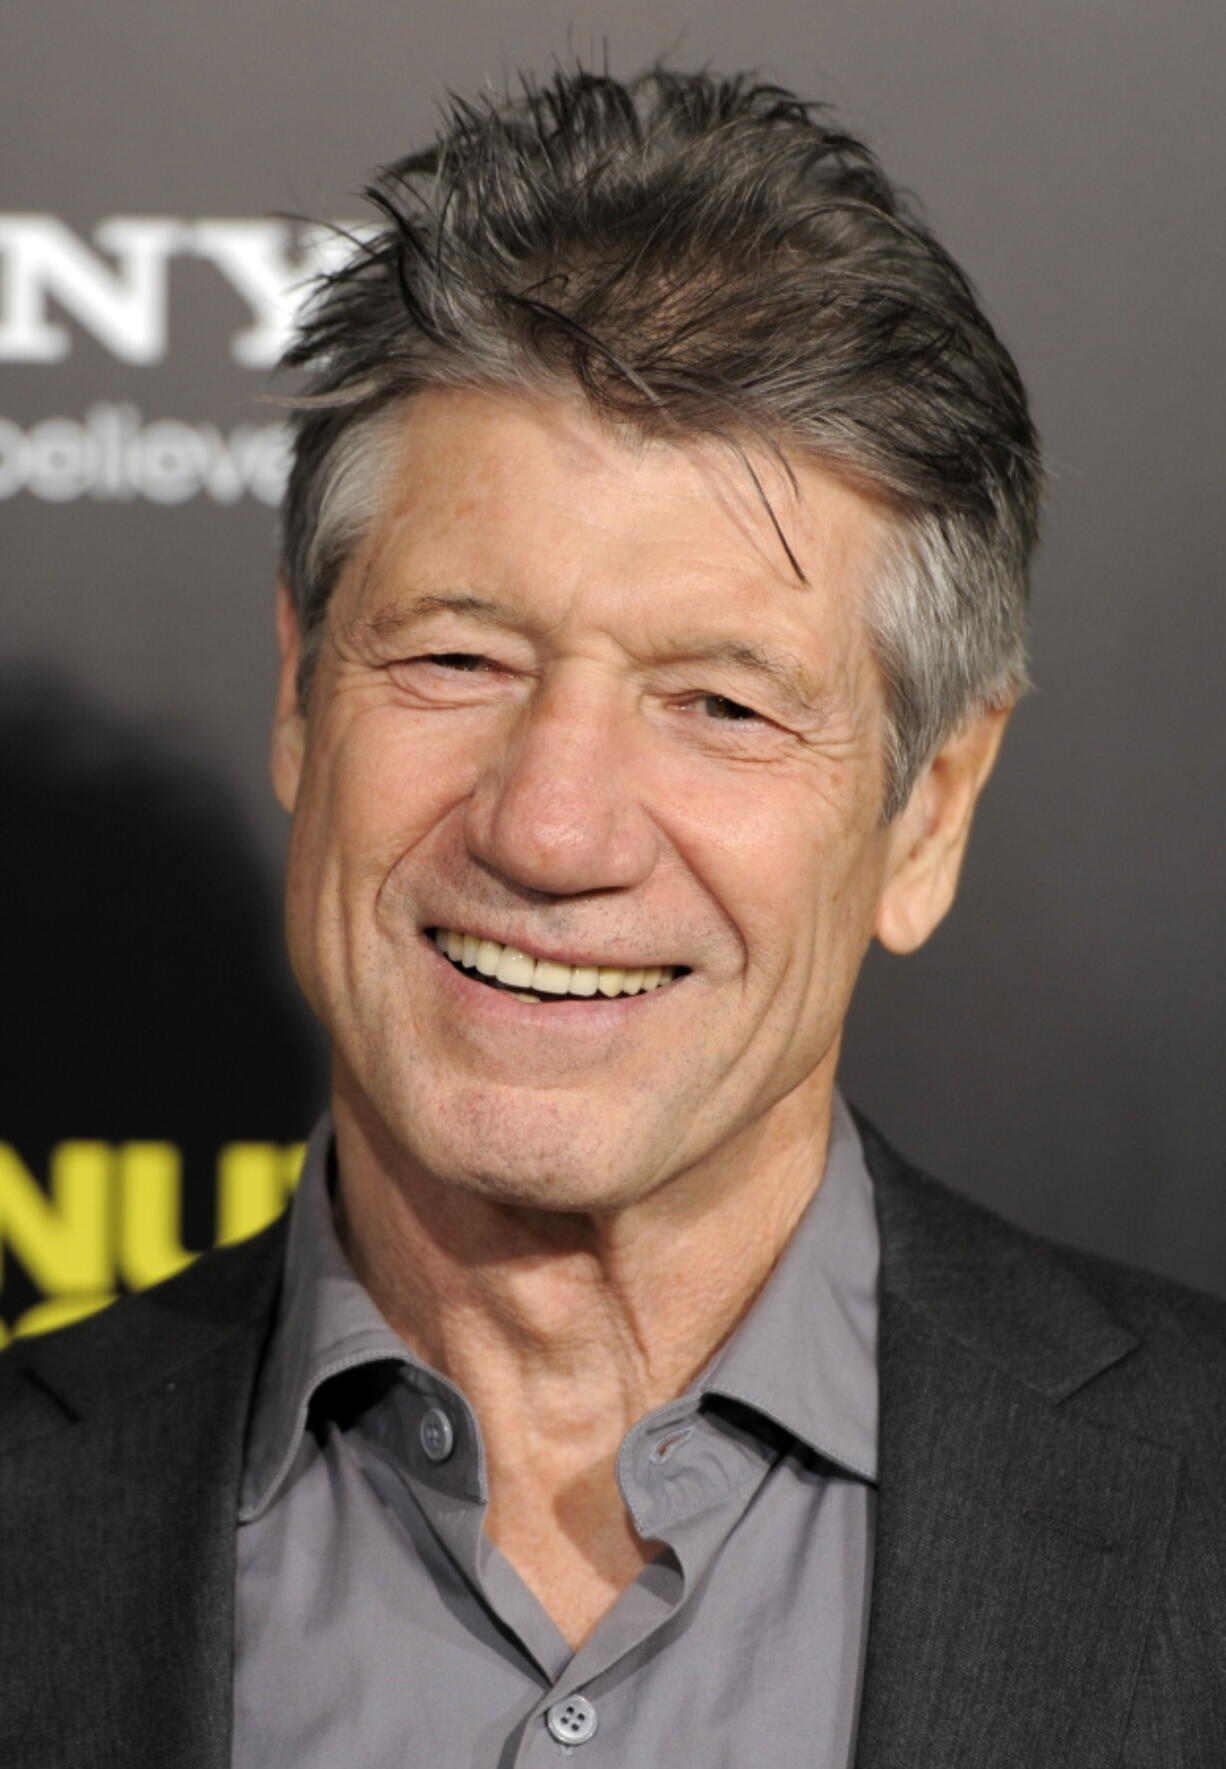 FILE - Fred Ward, a cast member in "30 Minutes or Less," poses at the premiere of the film in Los Angeles on Aug. 8, 2011. Ward, a veteran actor who brought a gruff tenderness to tough-guy roles in such films as ,??The Right Stuff,,?? ,??The Player,?? and ,??Tremors,,?? died Sunday, May 8, his publicist Ron Hofmann said Friday, May 13, 2022. He was 79.